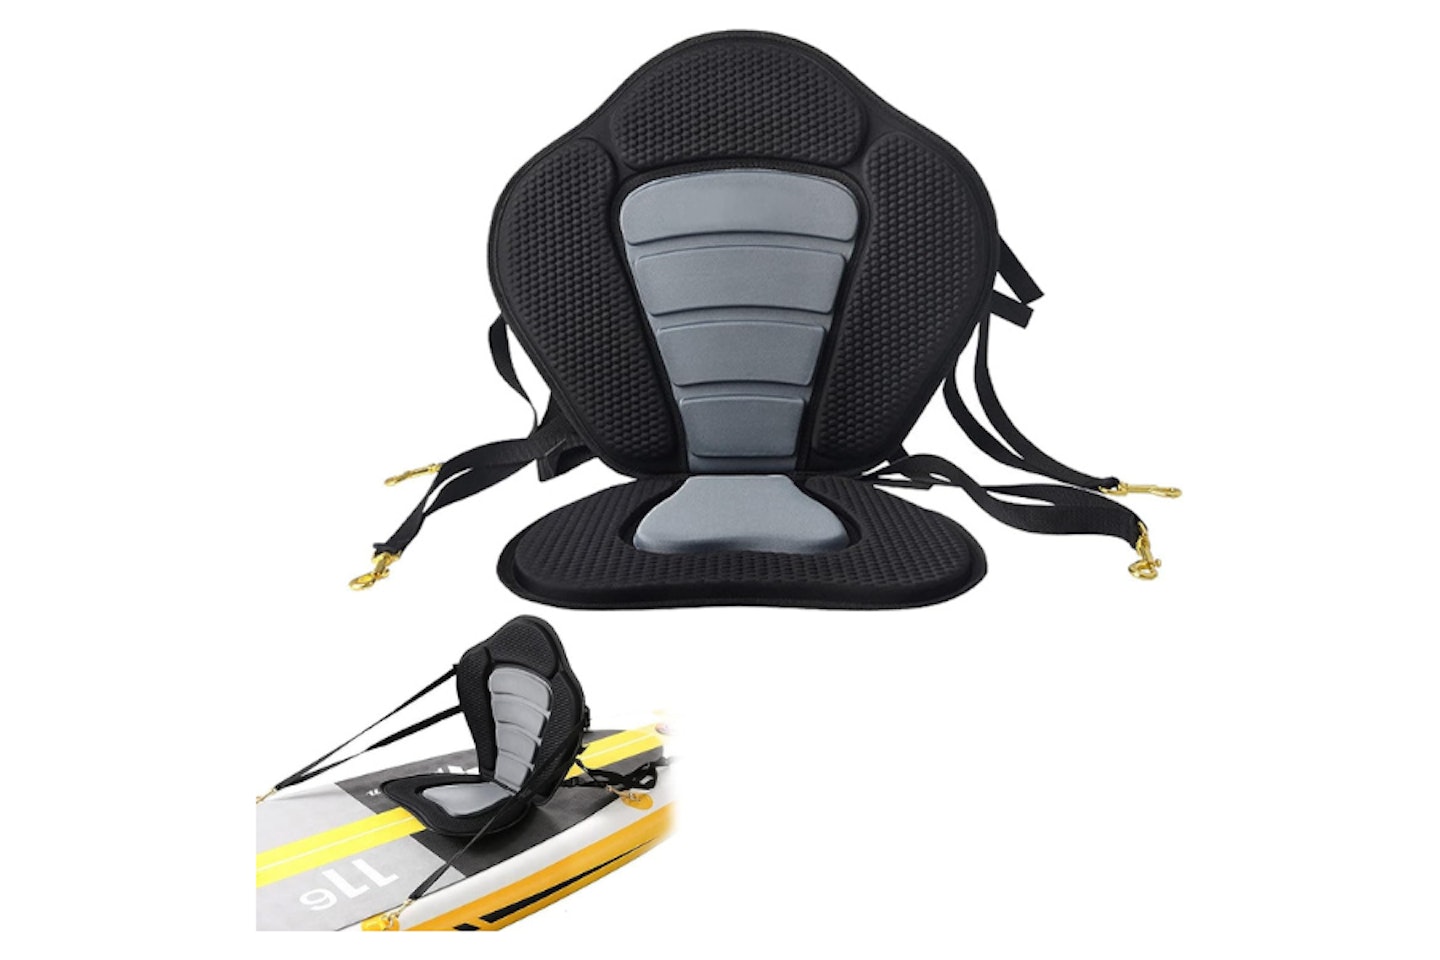 BEYOND MARINA Kayak Seats with Back Support for Sit On Top